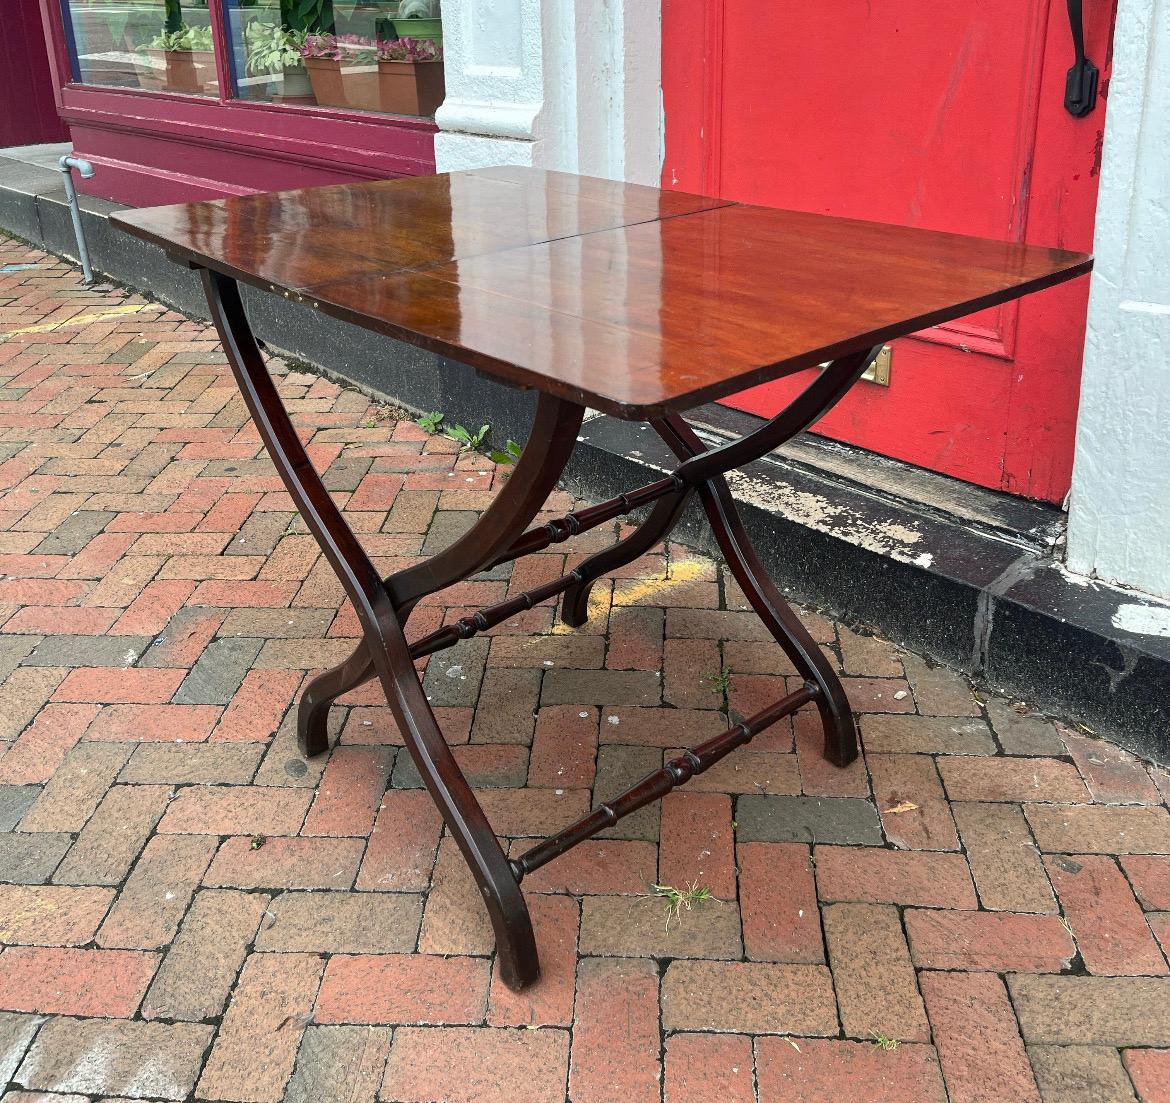 19th century English mahogany coaching table. Made during the height of the patent and campaign furniture rage this piece was designed to be folded and taken with you for a little sophistication while on the hunt or campaign. The table folds in half